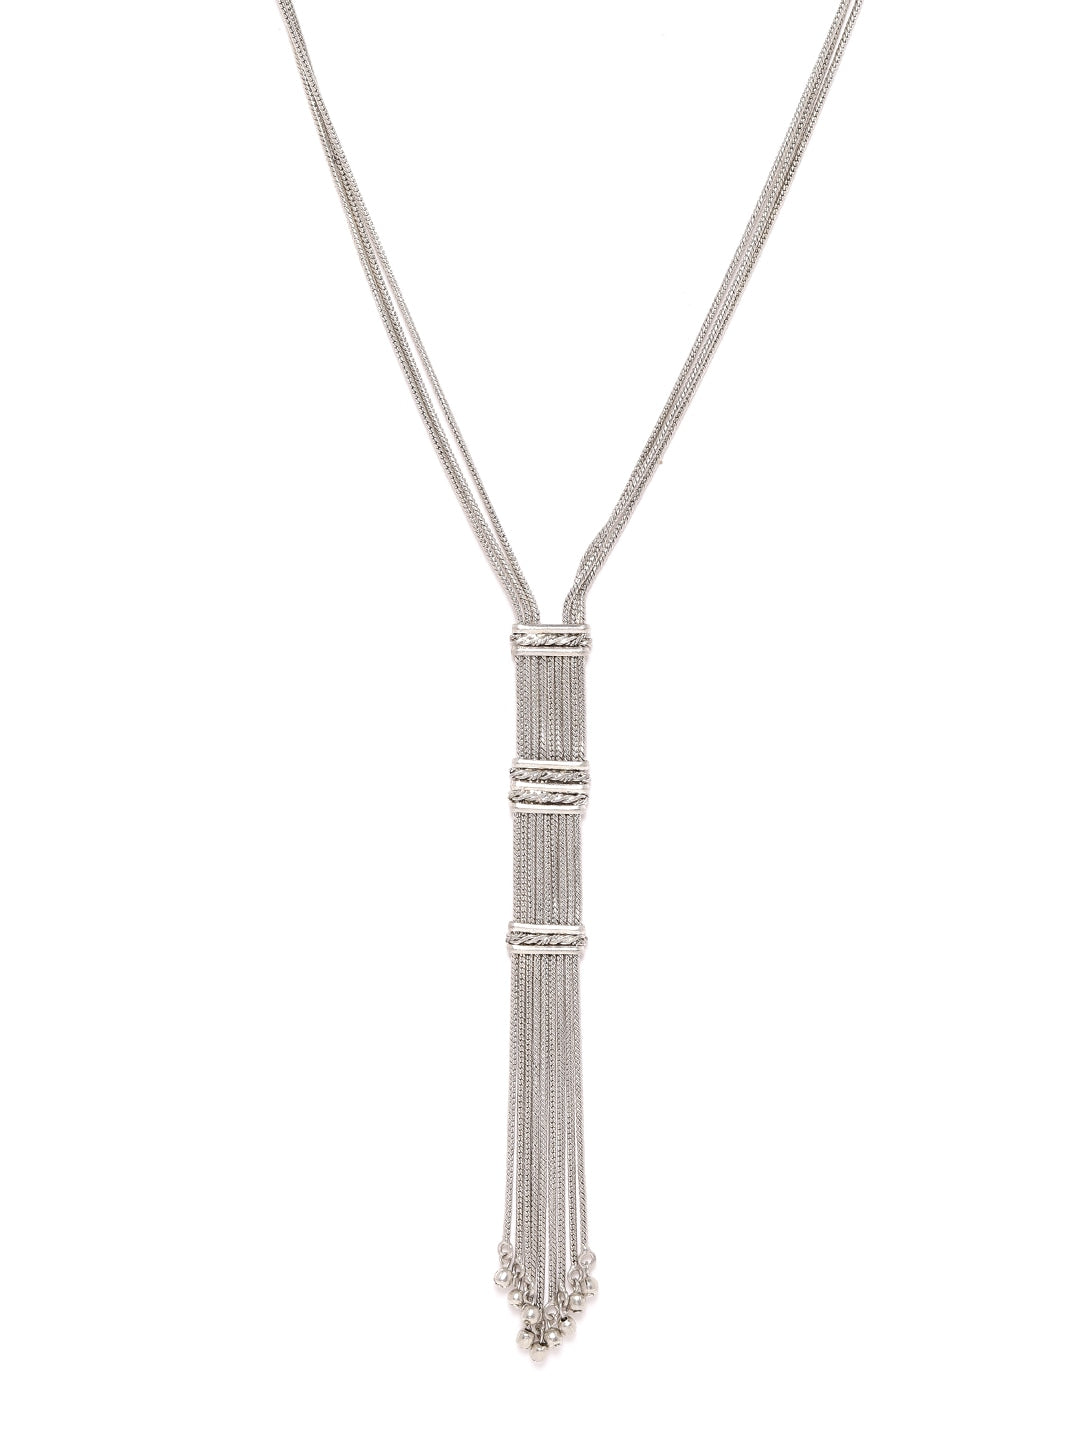 RICHEERA Silver Plated Layered & Tasseled Necklace